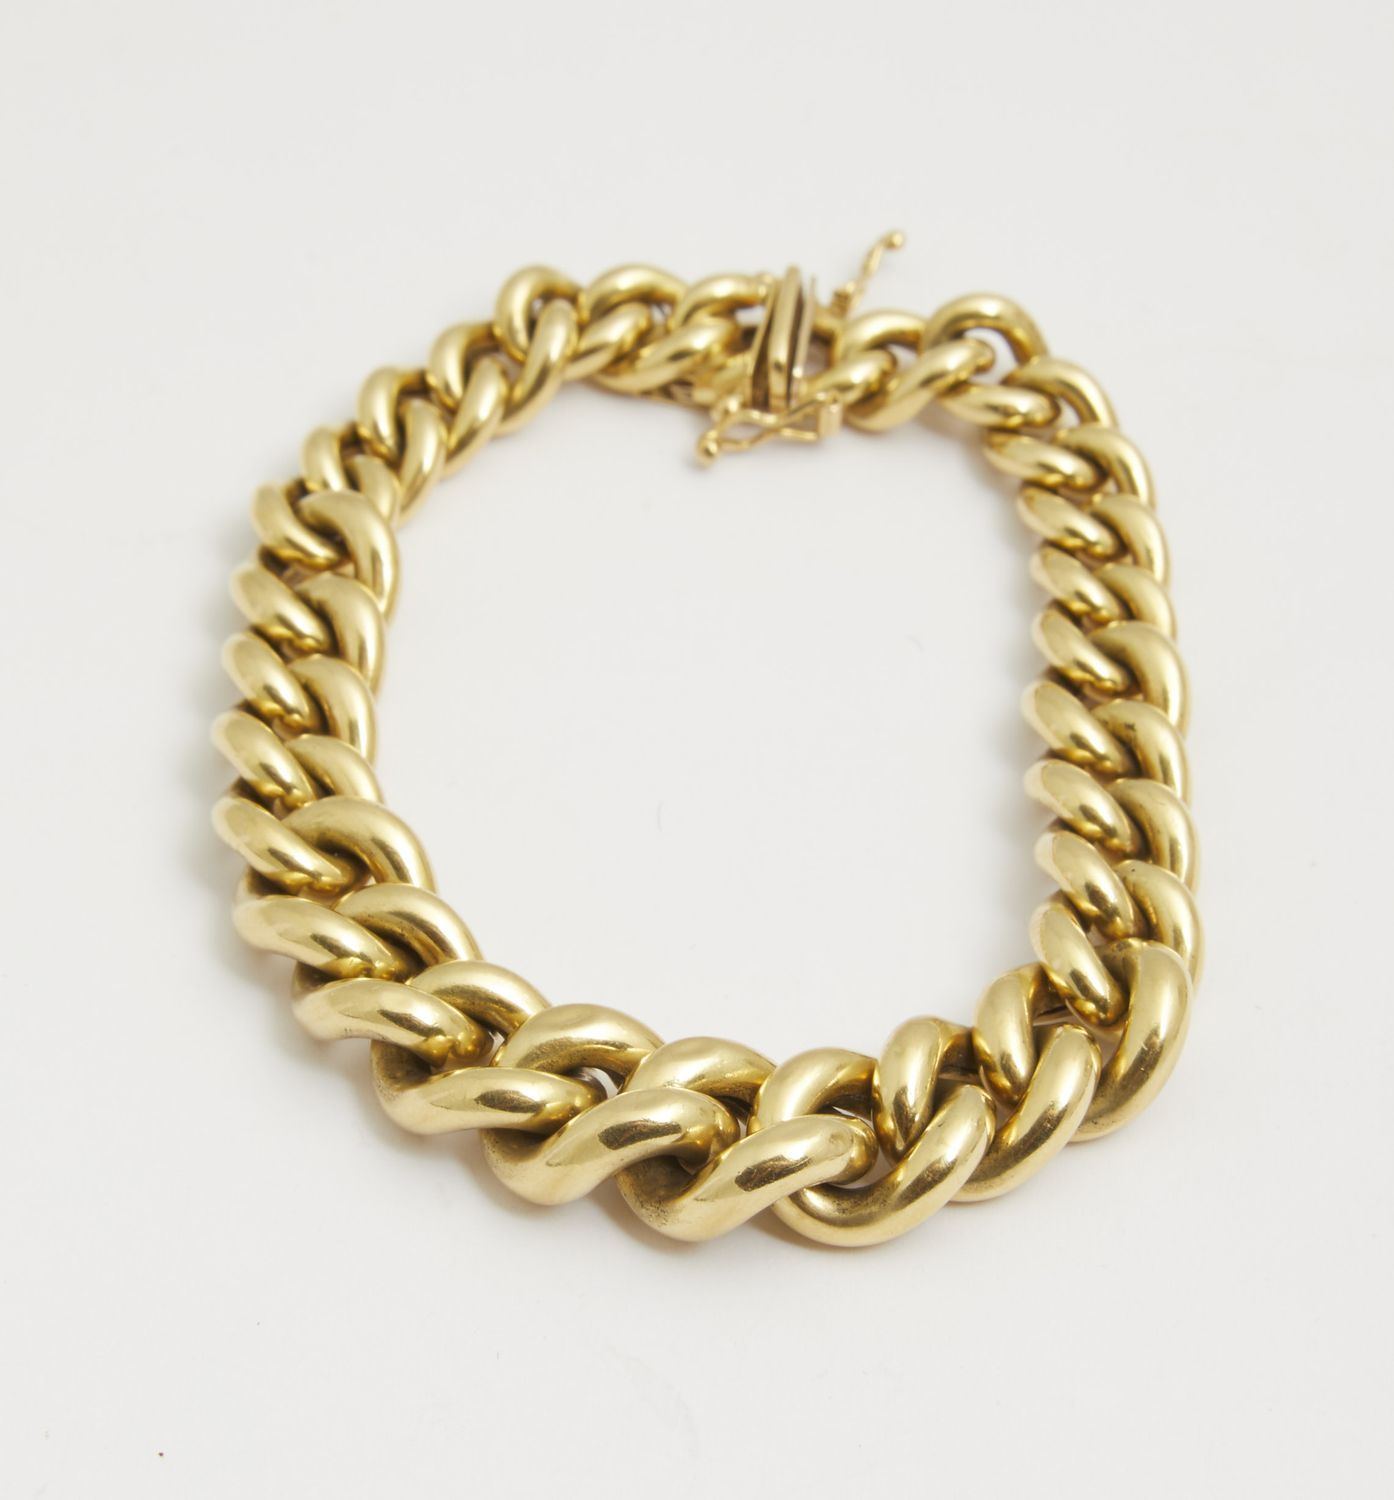 Null 79 Yellow gold curb chain bracelet


27.6g